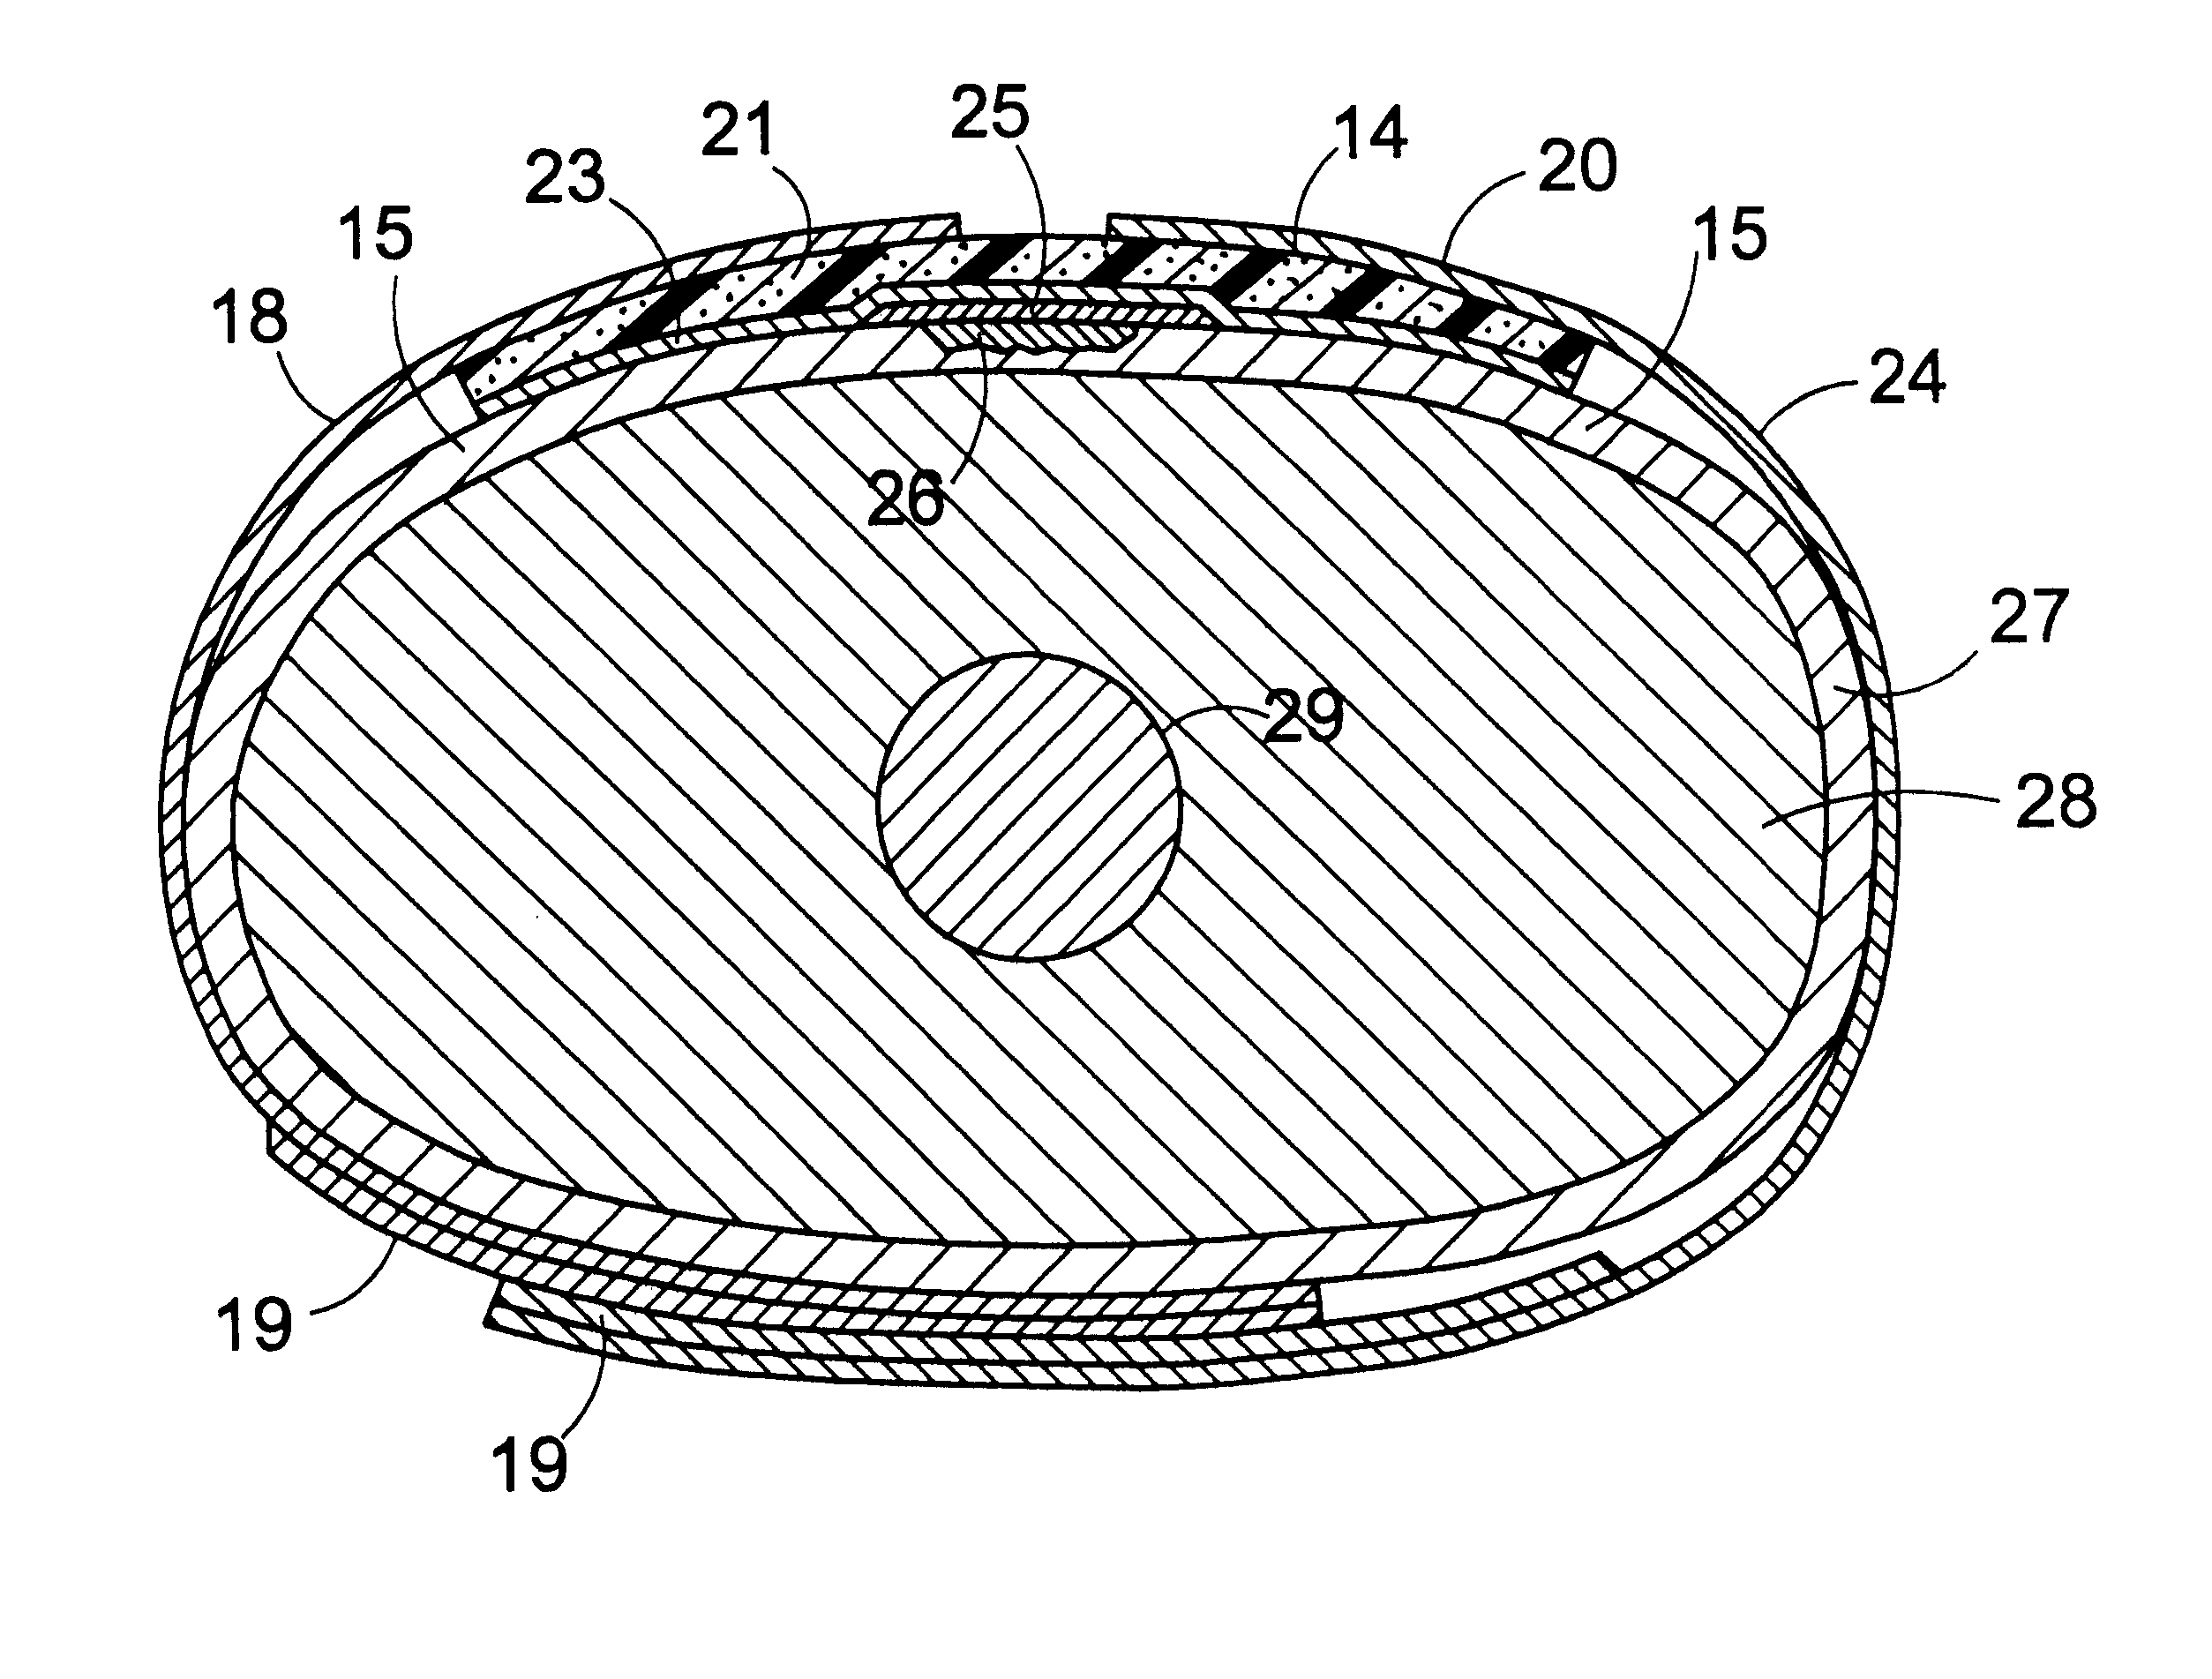 Insulator-conductor device for maintaining a wound near normal body temperature